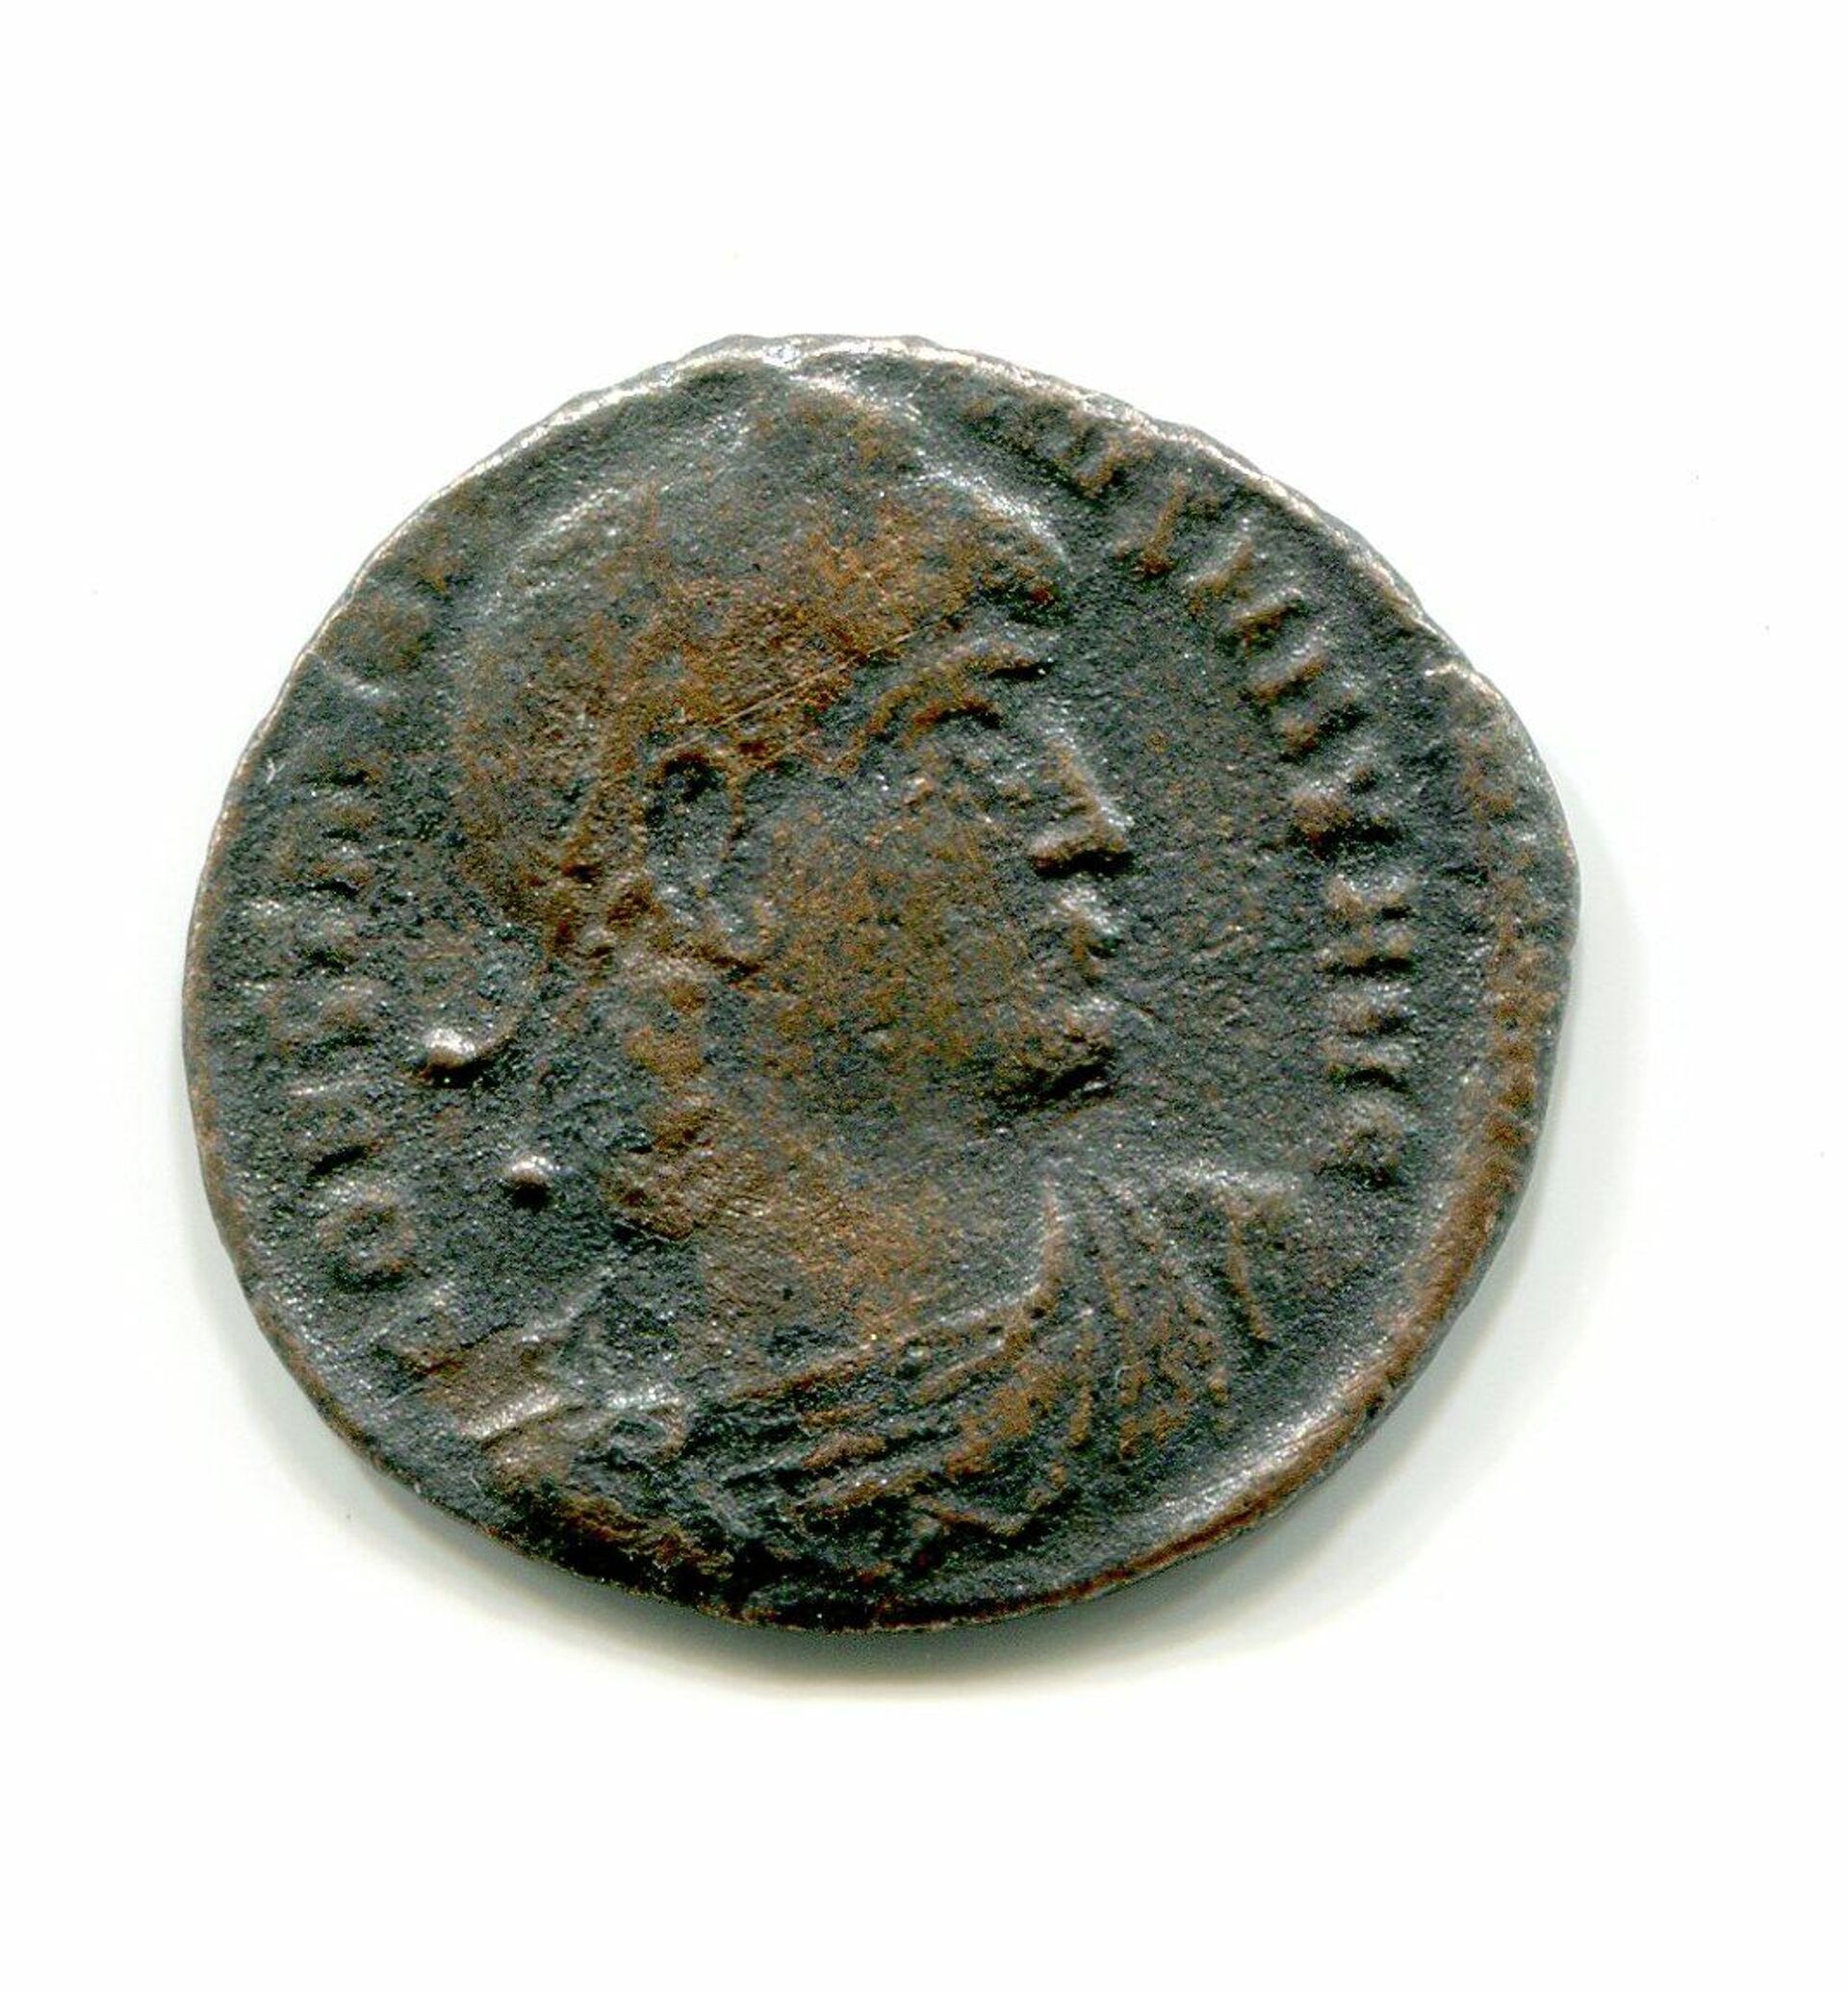 Coin discovered by archaeologist of the Kulikovo Battlefield Museum in a forest 10 km from the centre of Tula - Sputnik International, 1920, 19.11.2021